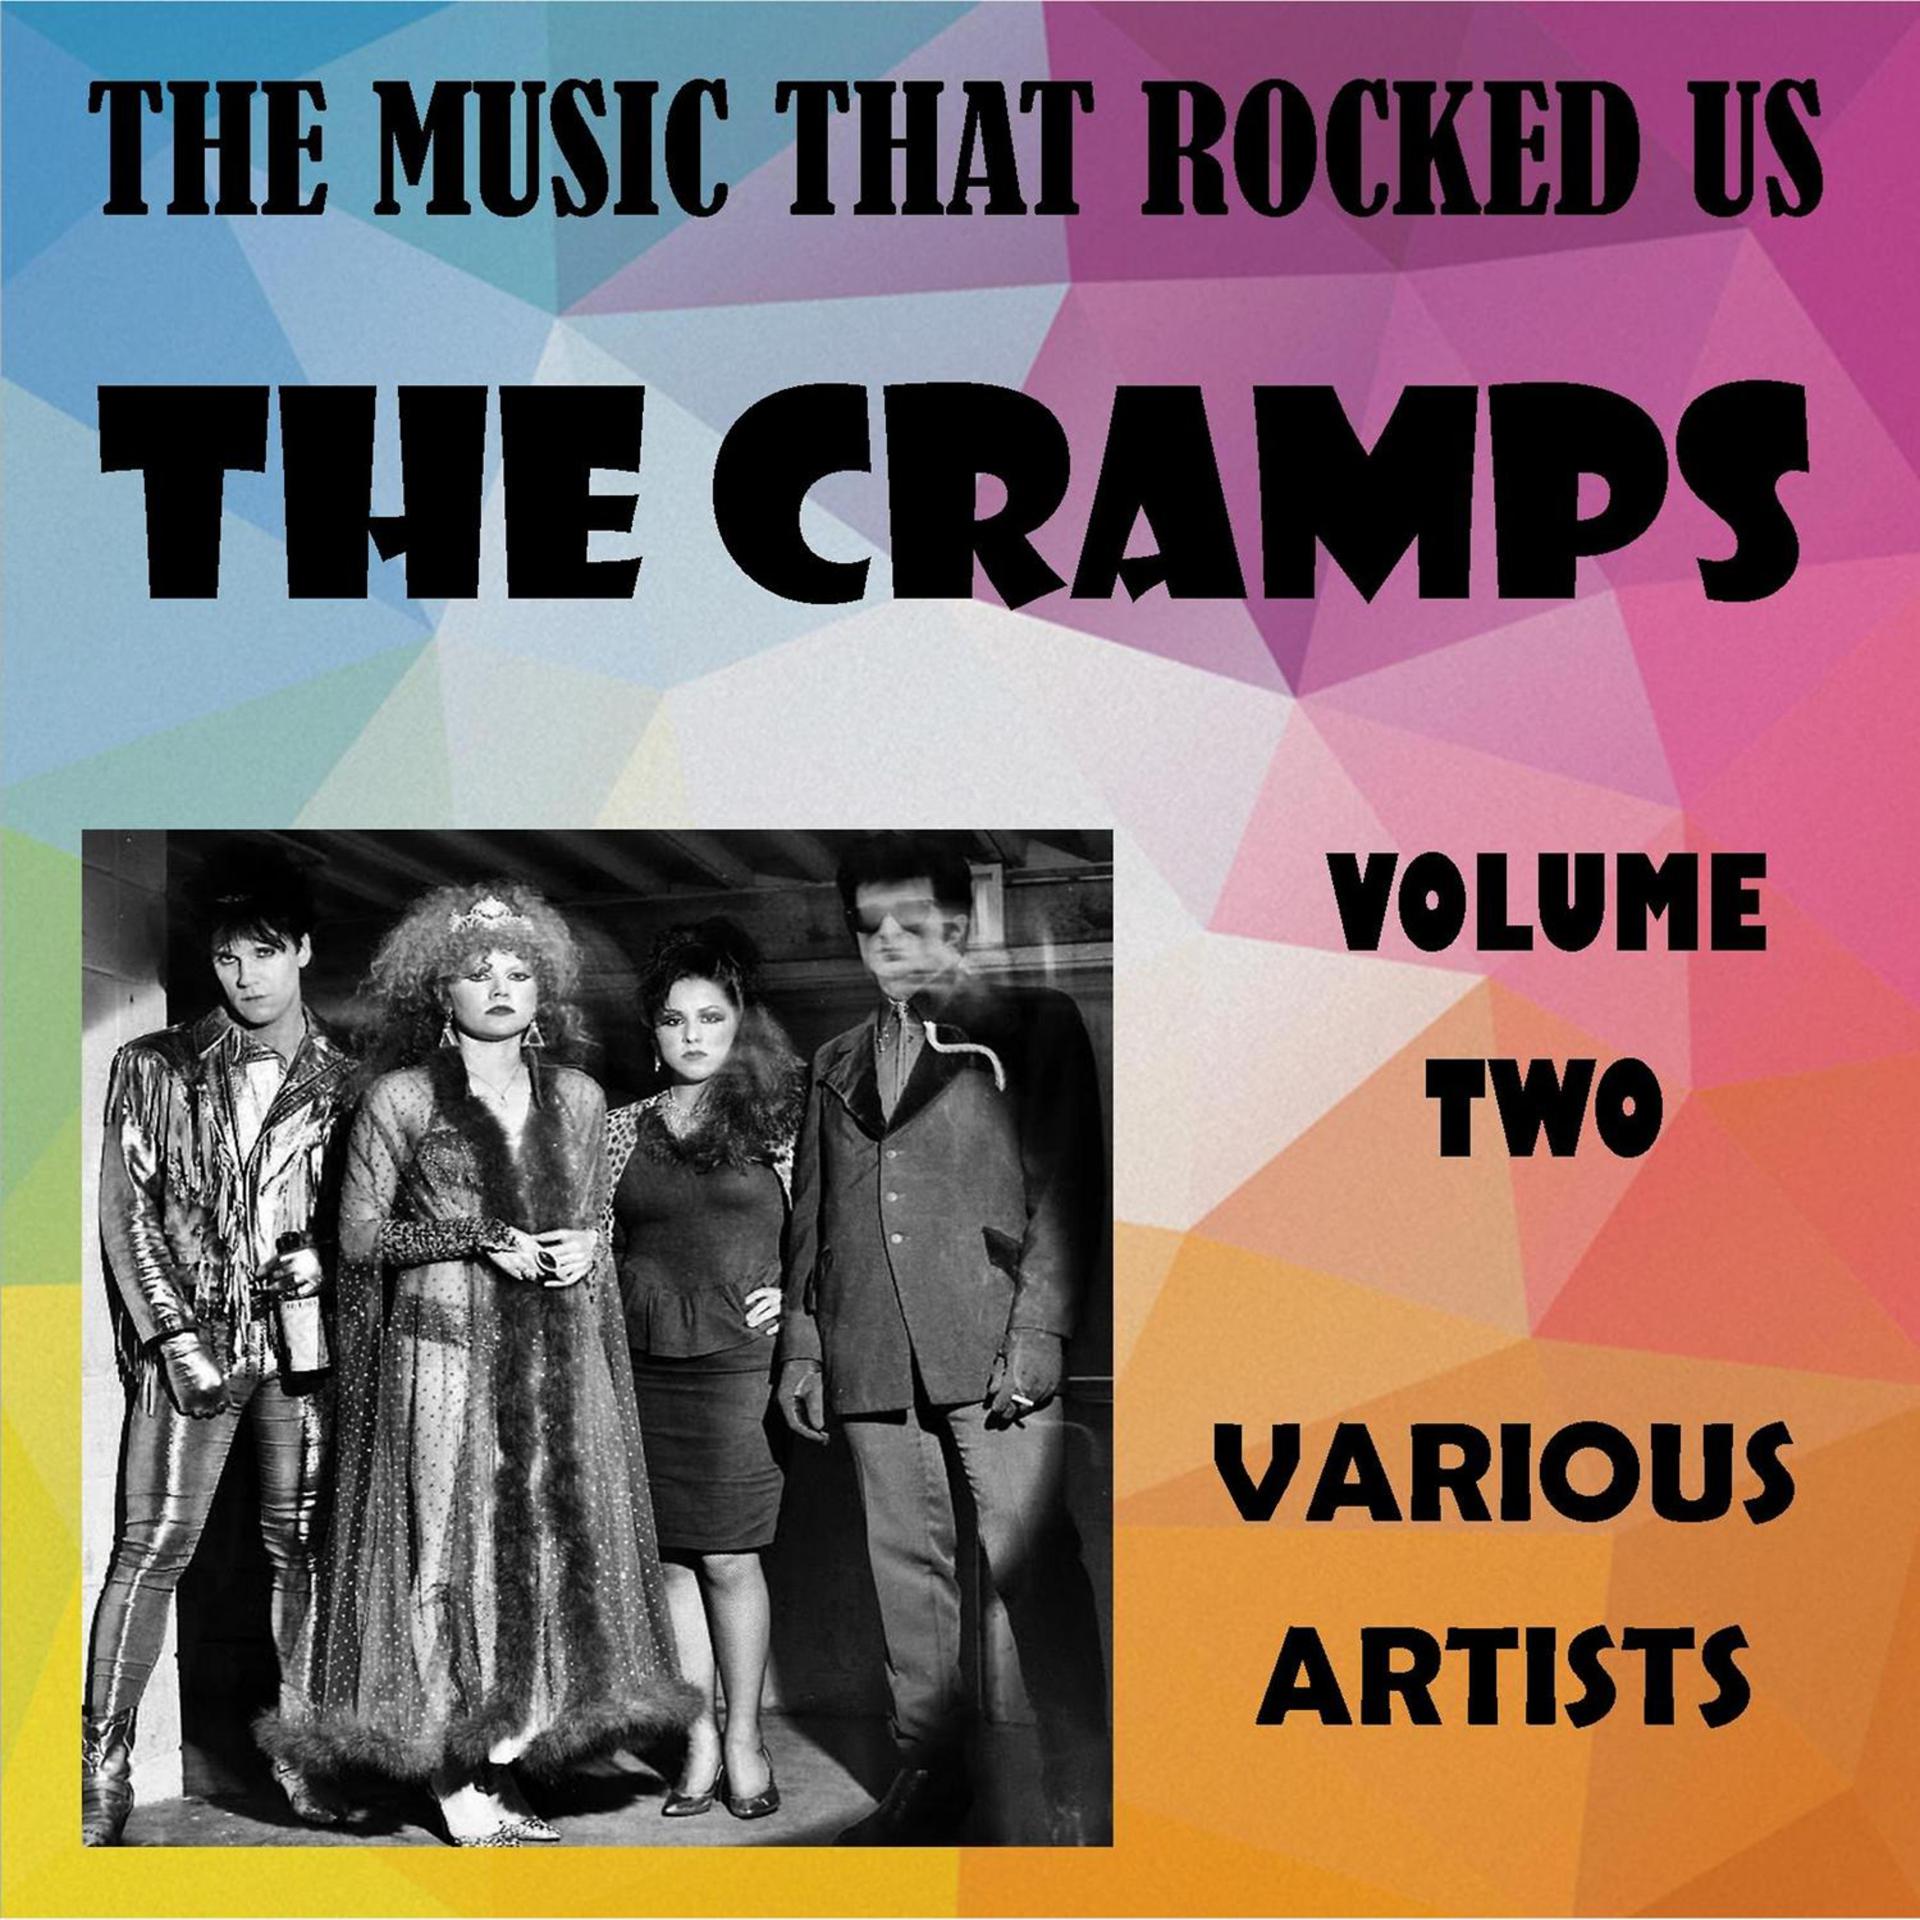 Постер альбома The Music That Rocked Us - The Cramps - Vol. 2